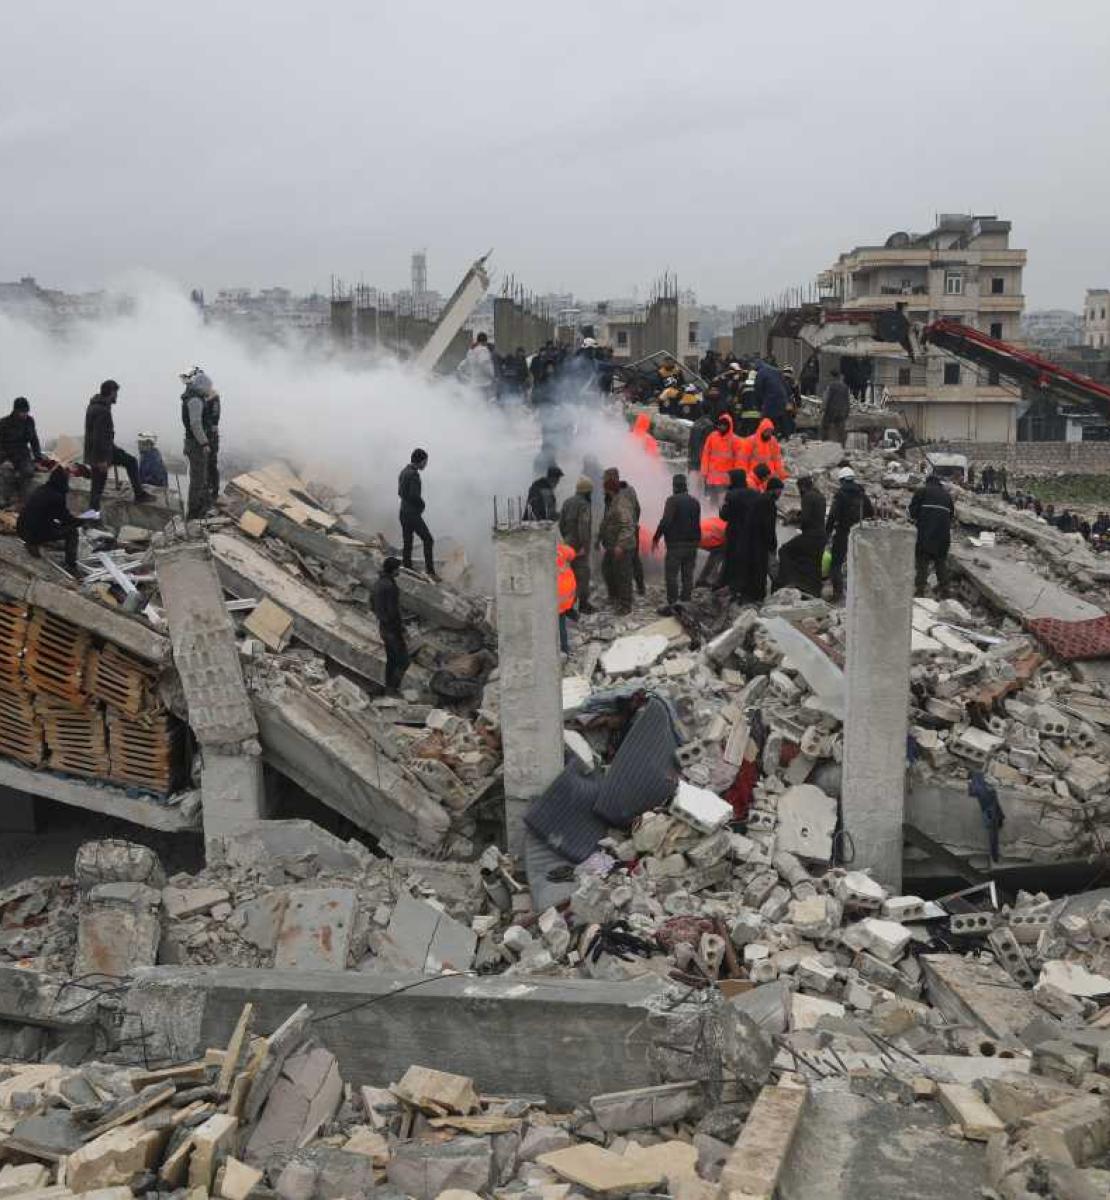 Several people standing on debris from building destroyed by earthquake in Syria